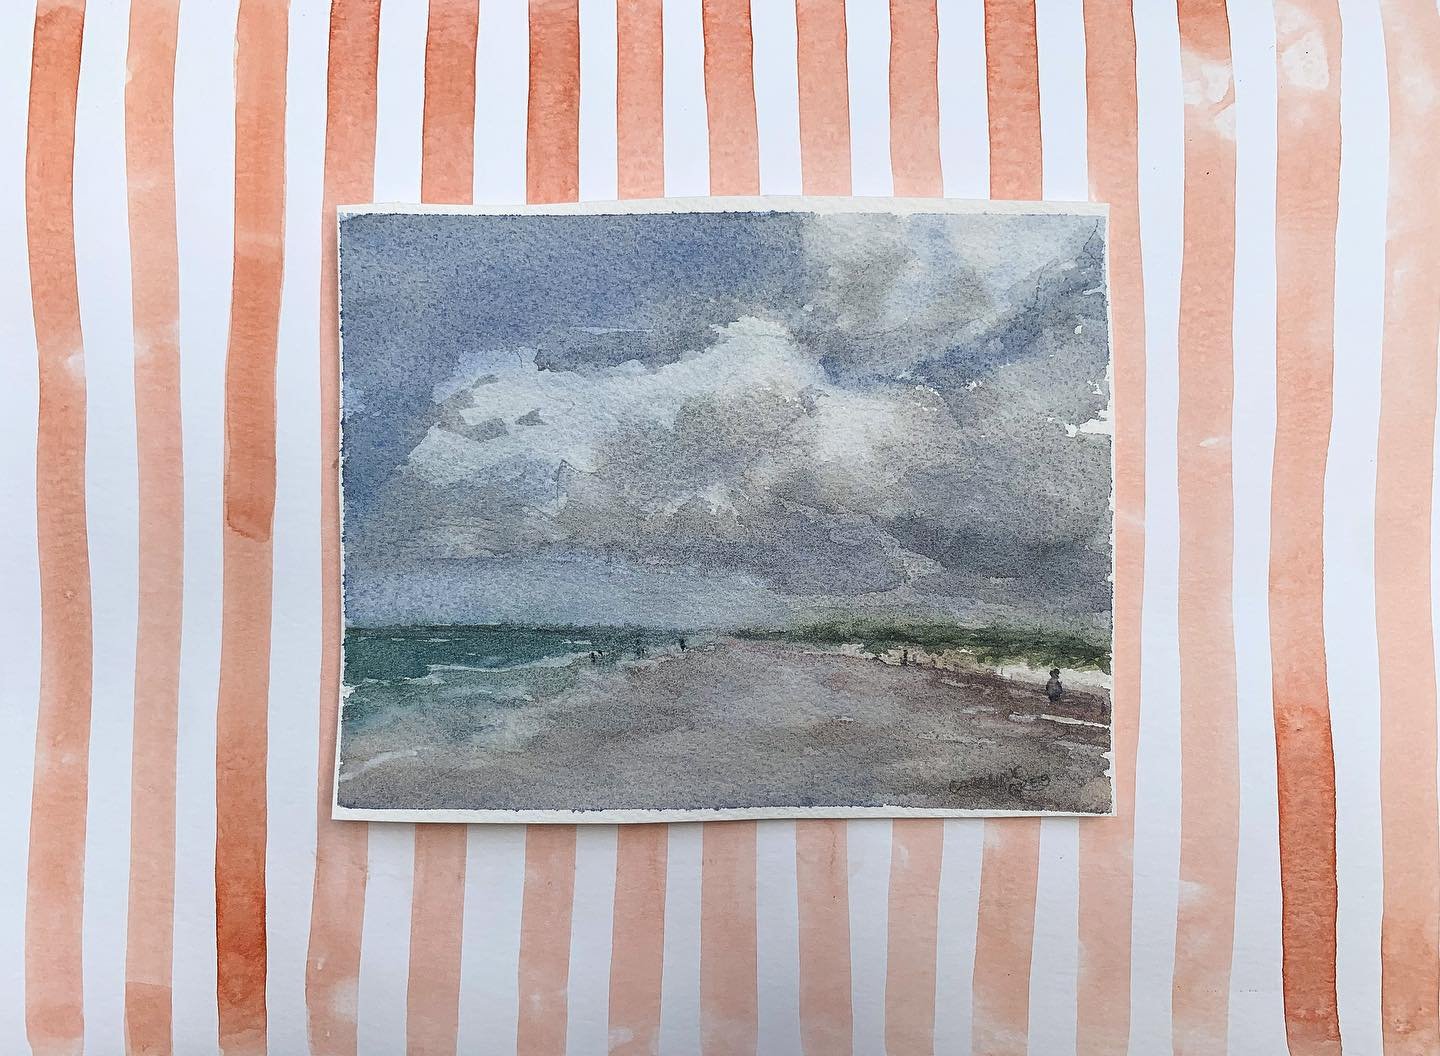 &ldquo;I have learned to kiss the wave that throws me against the Rock of Ages.&rdquo; - Charles Spurgeon 
.
&ldquo;Looking Back&rdquo; is the fifth work from 2024&rsquo;s monthly series&mdash;the Home Collection&mdash;monthly watercolors of home rel